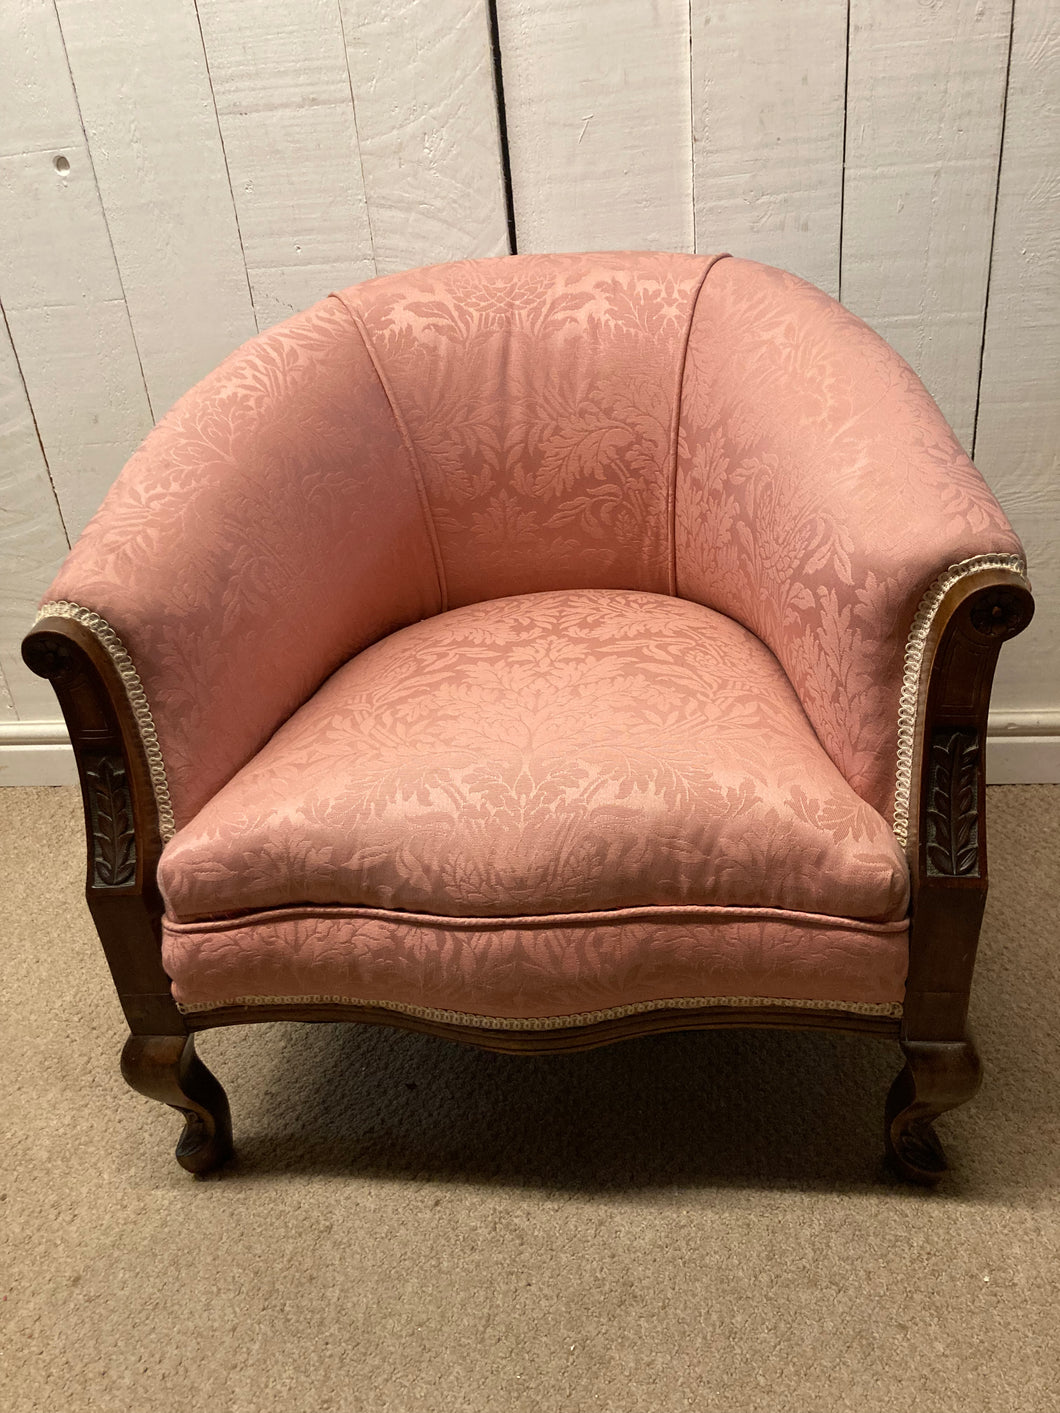 Antique Mahogany Framed Pink Upholstered Armchair